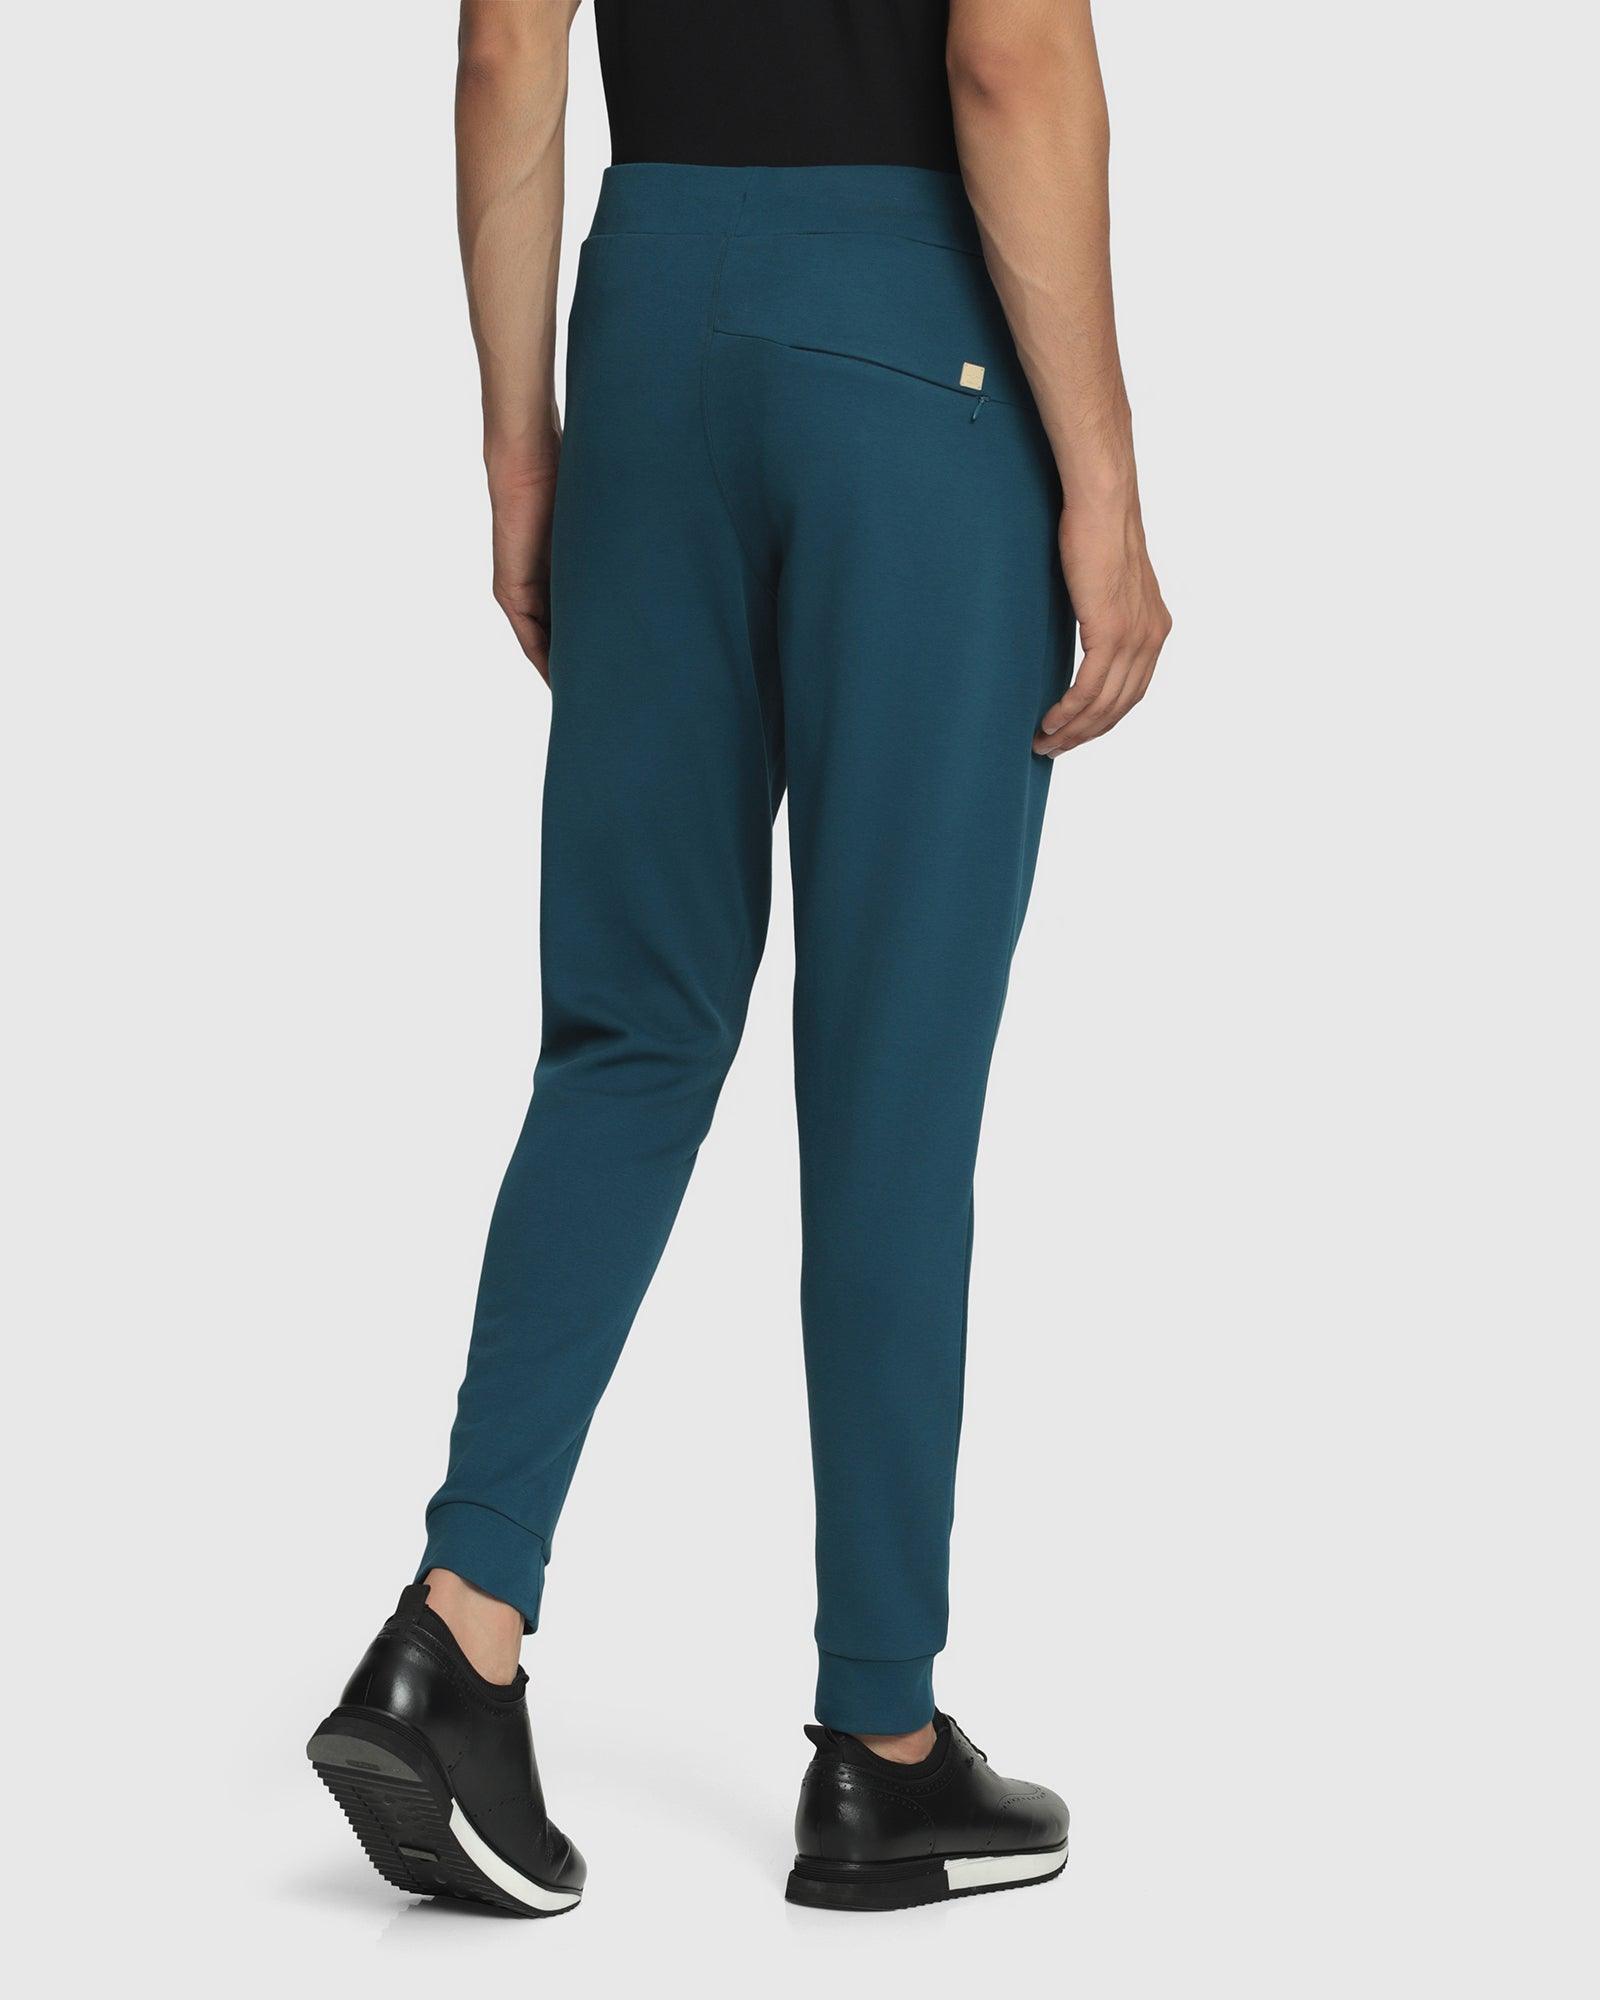 Casual Teal Blue Printed Jogger - Accent